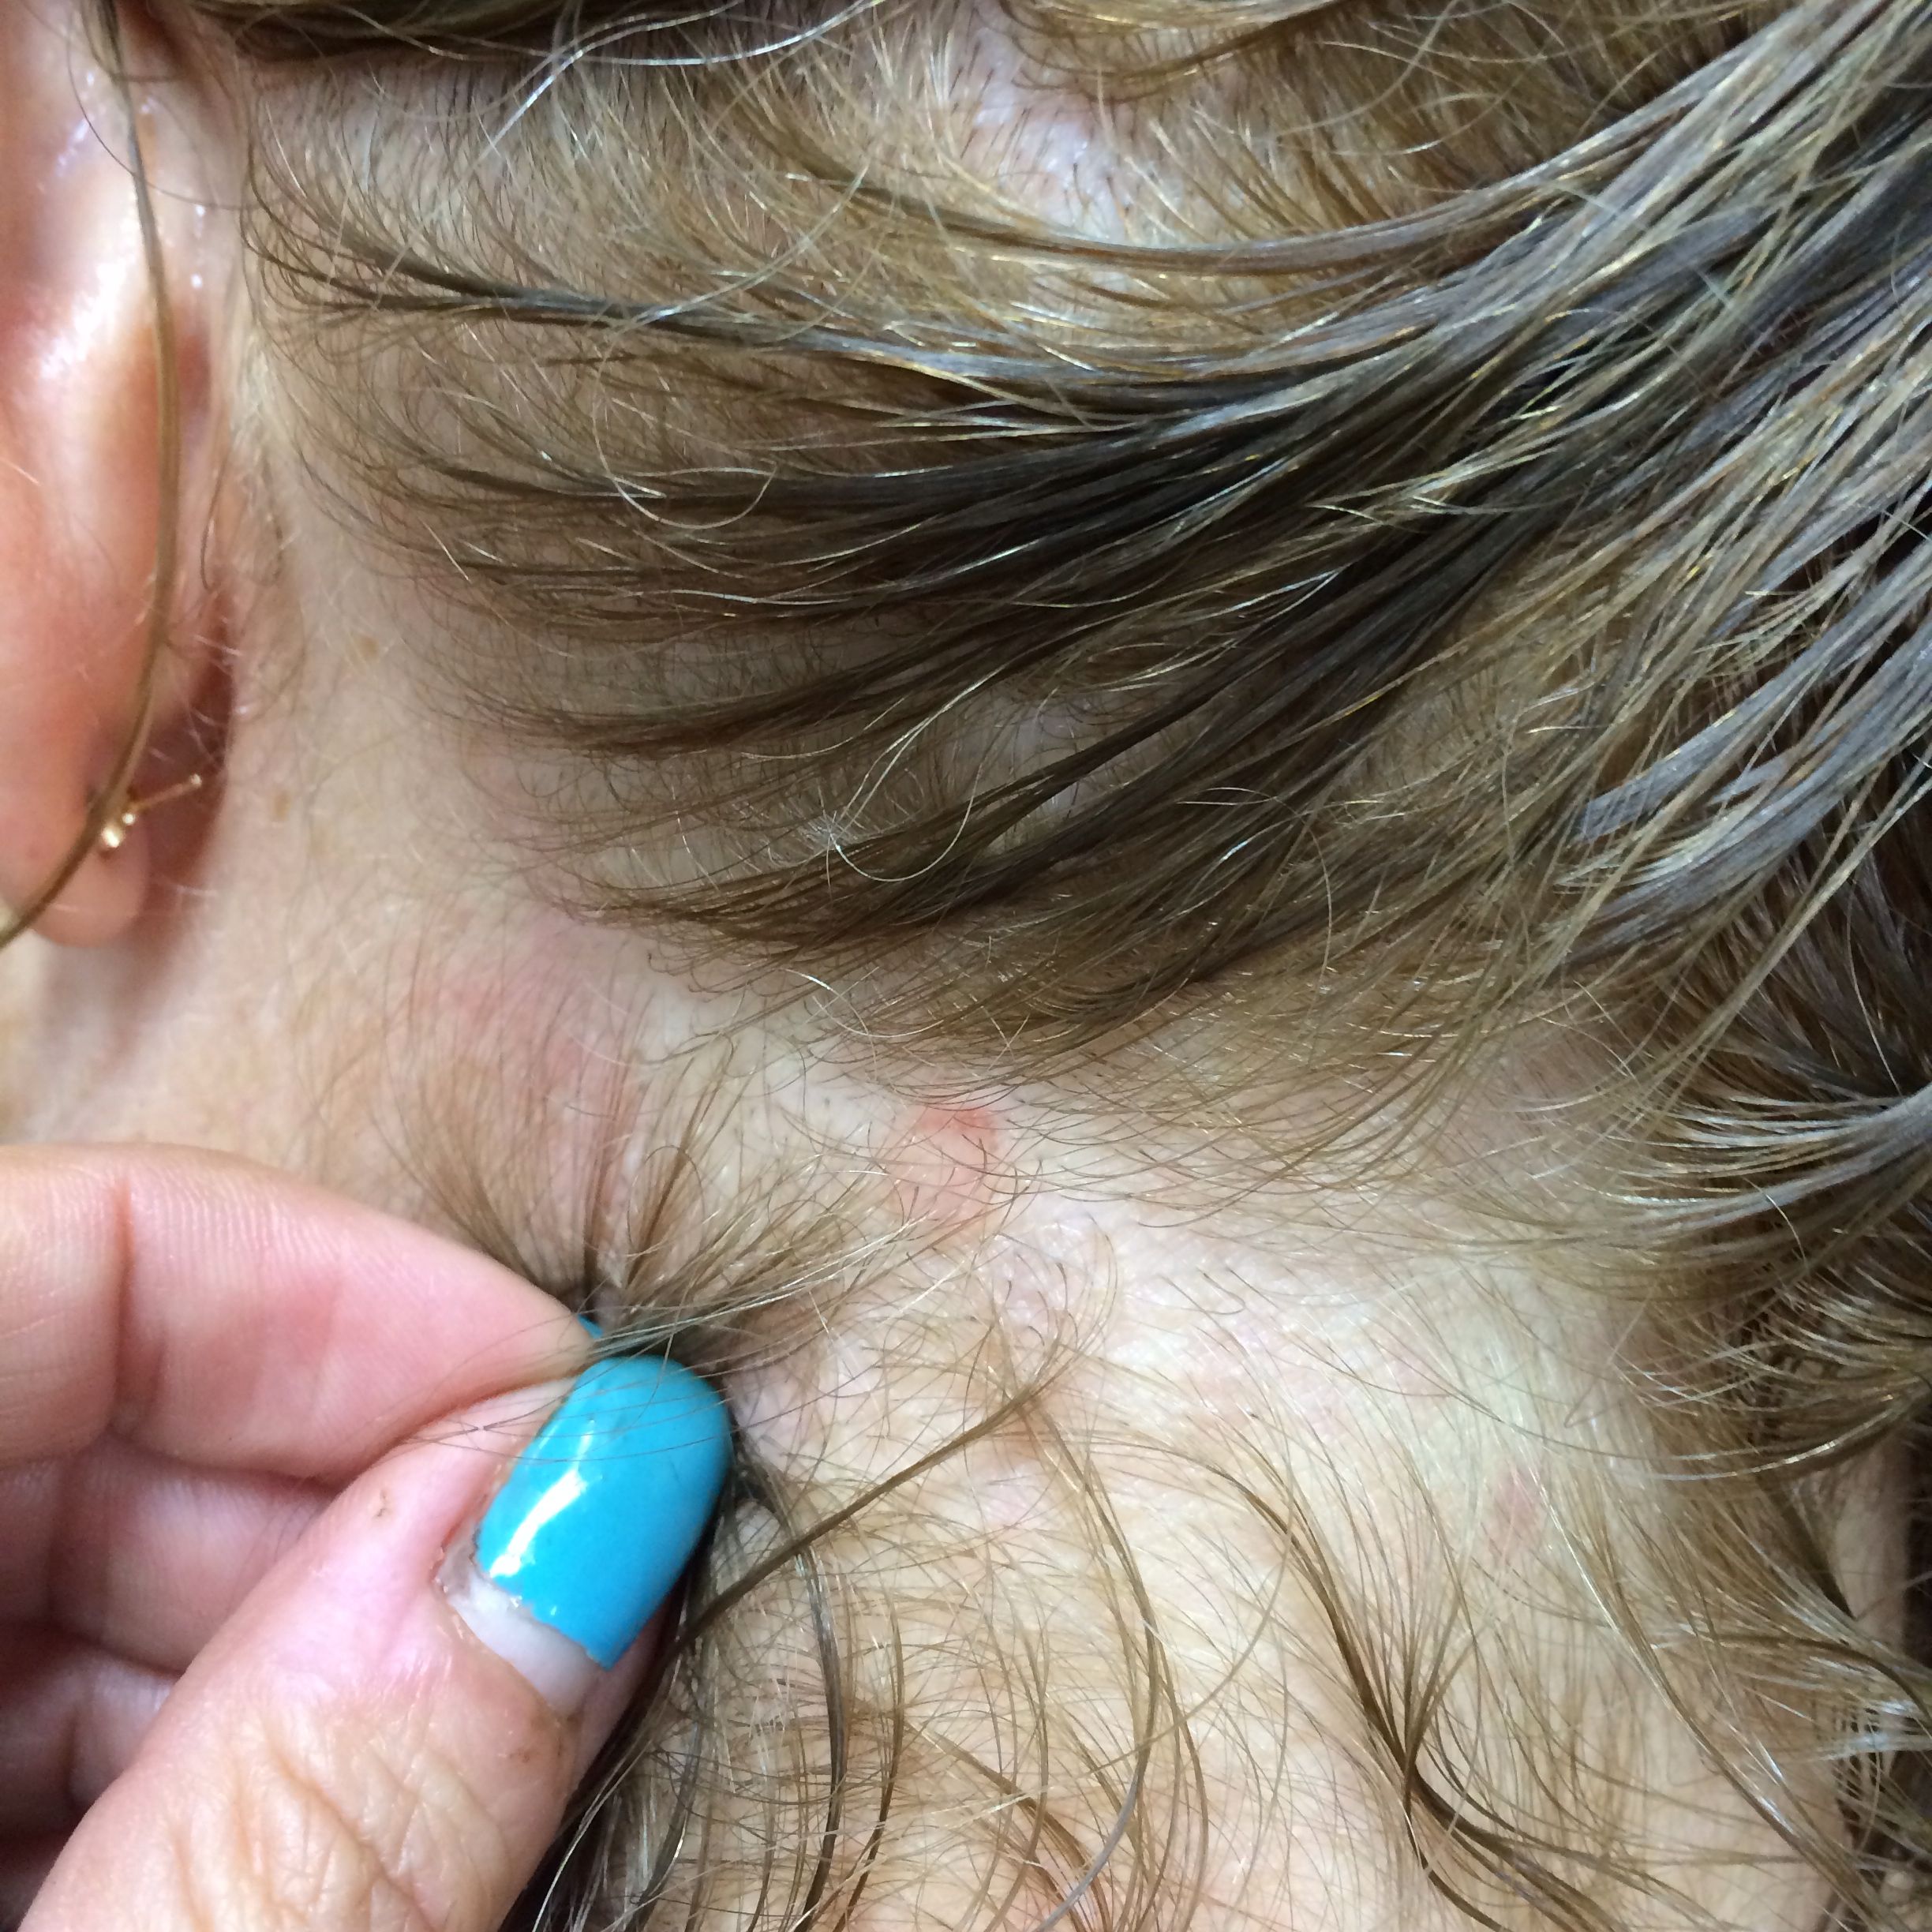 Possible scalp ringworm